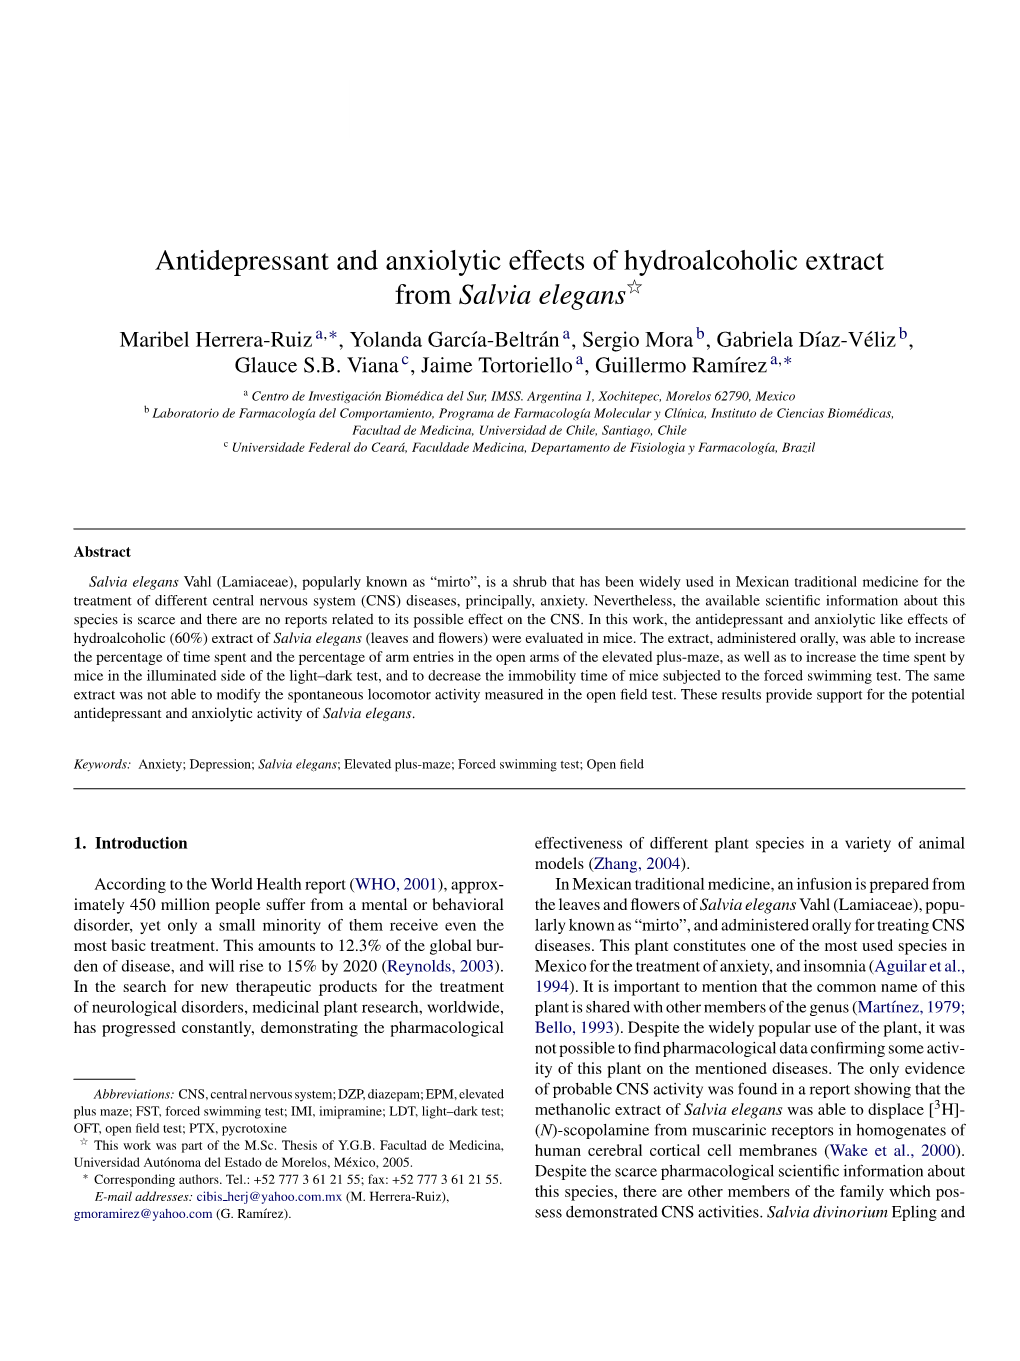 Antidepressant and Anxiolytic Effects of Hydroalcoholic Extract From